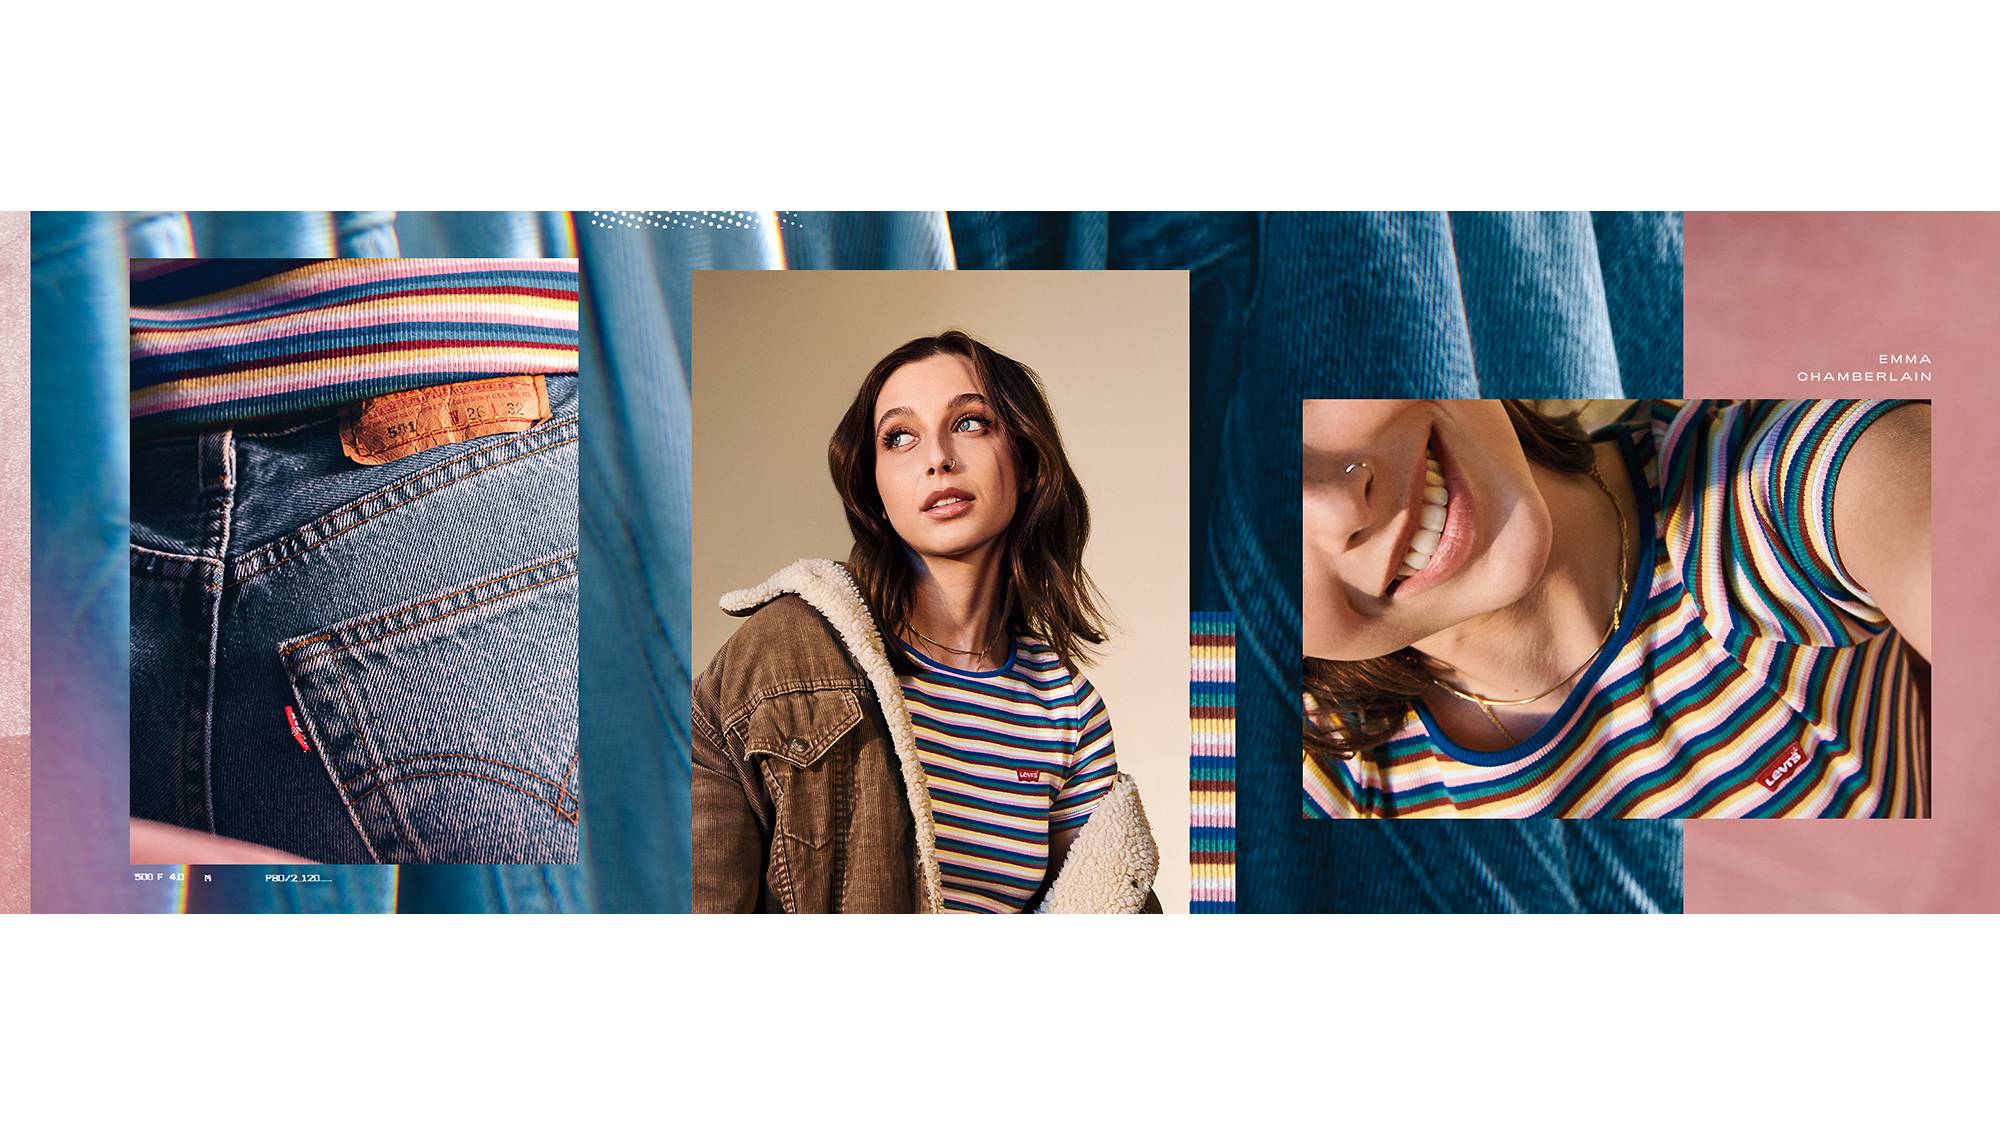 Three photos overlaid on a photo of jeans. The first photo shows the back pocket of Emma's Levi jeans. The second photo is a portrait shot of Emma Chamerlain wearing a striped Levi's shirt and a Levi's brown sherpa trucker. The third photo is a closeup shot of Emma's smiling face.